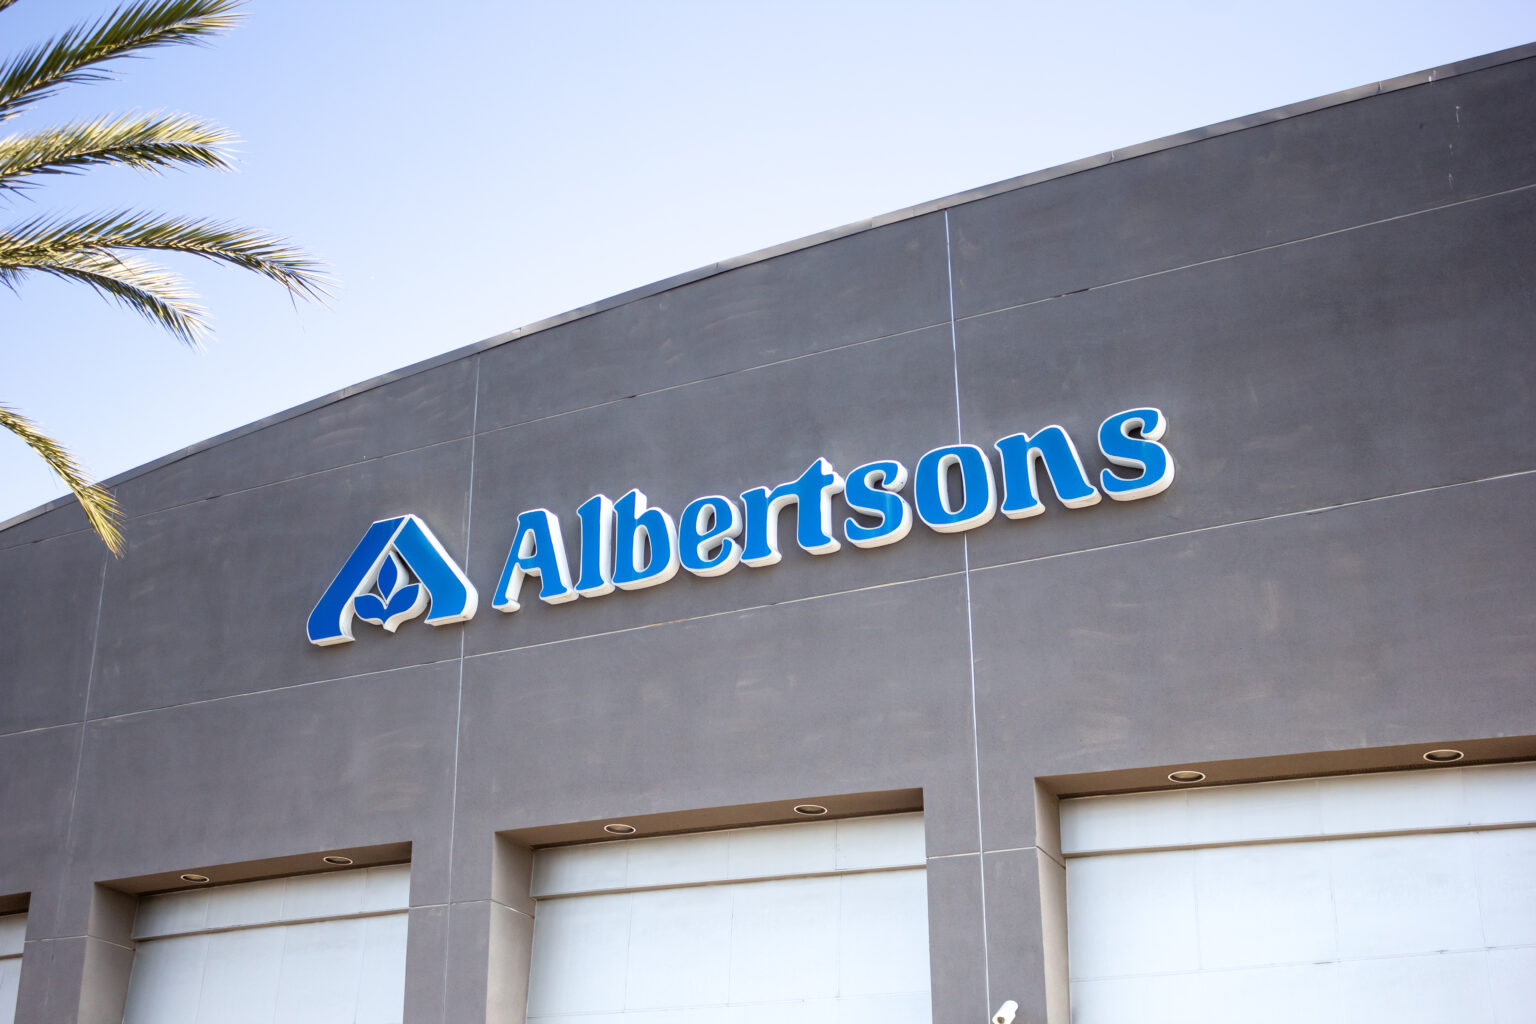 Exterior of an Albertsons store